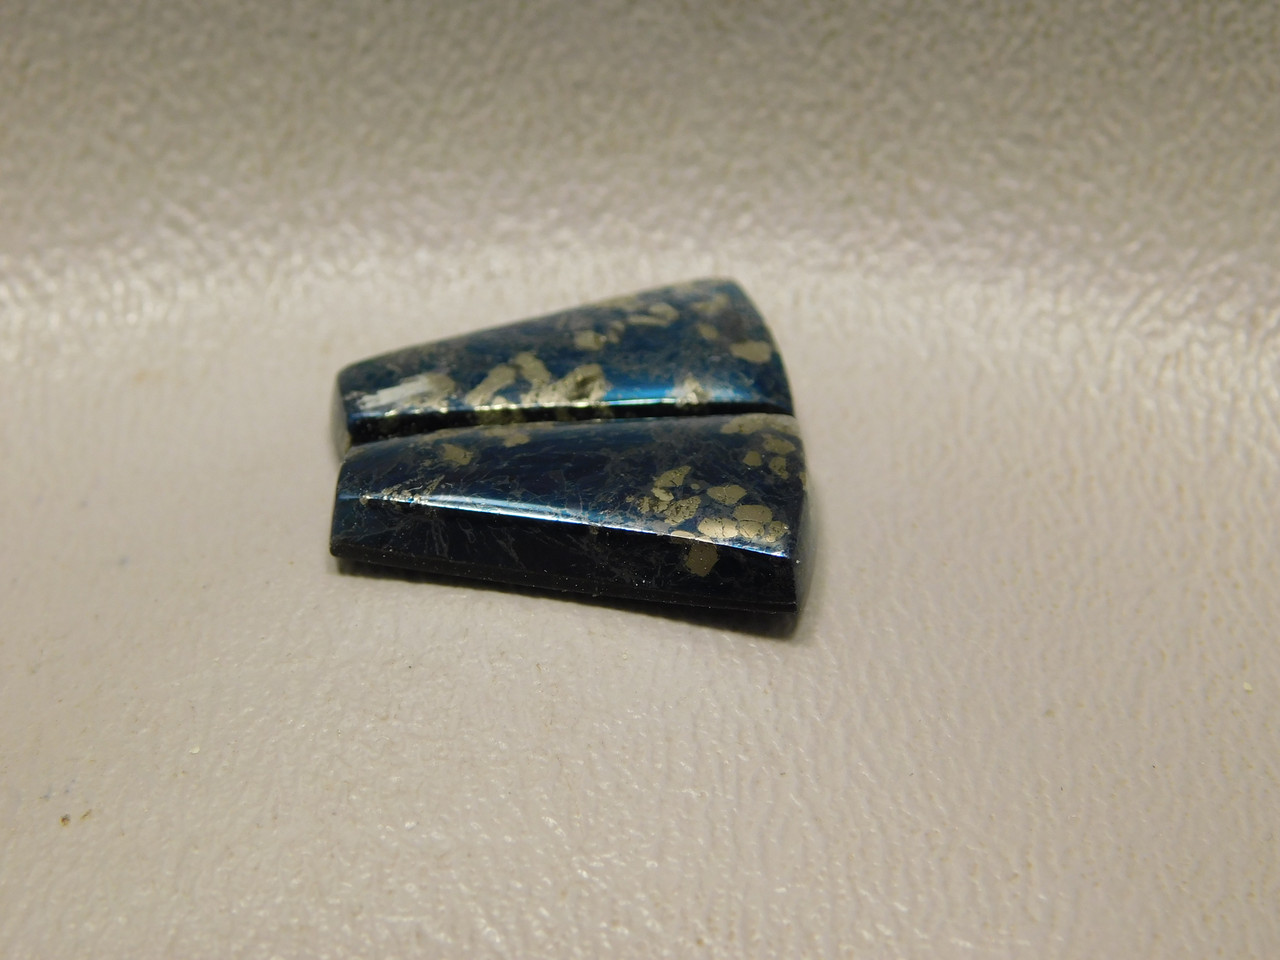 Covellite Metallic Blue Stone Cabochons Matched Pair for Earrings #2